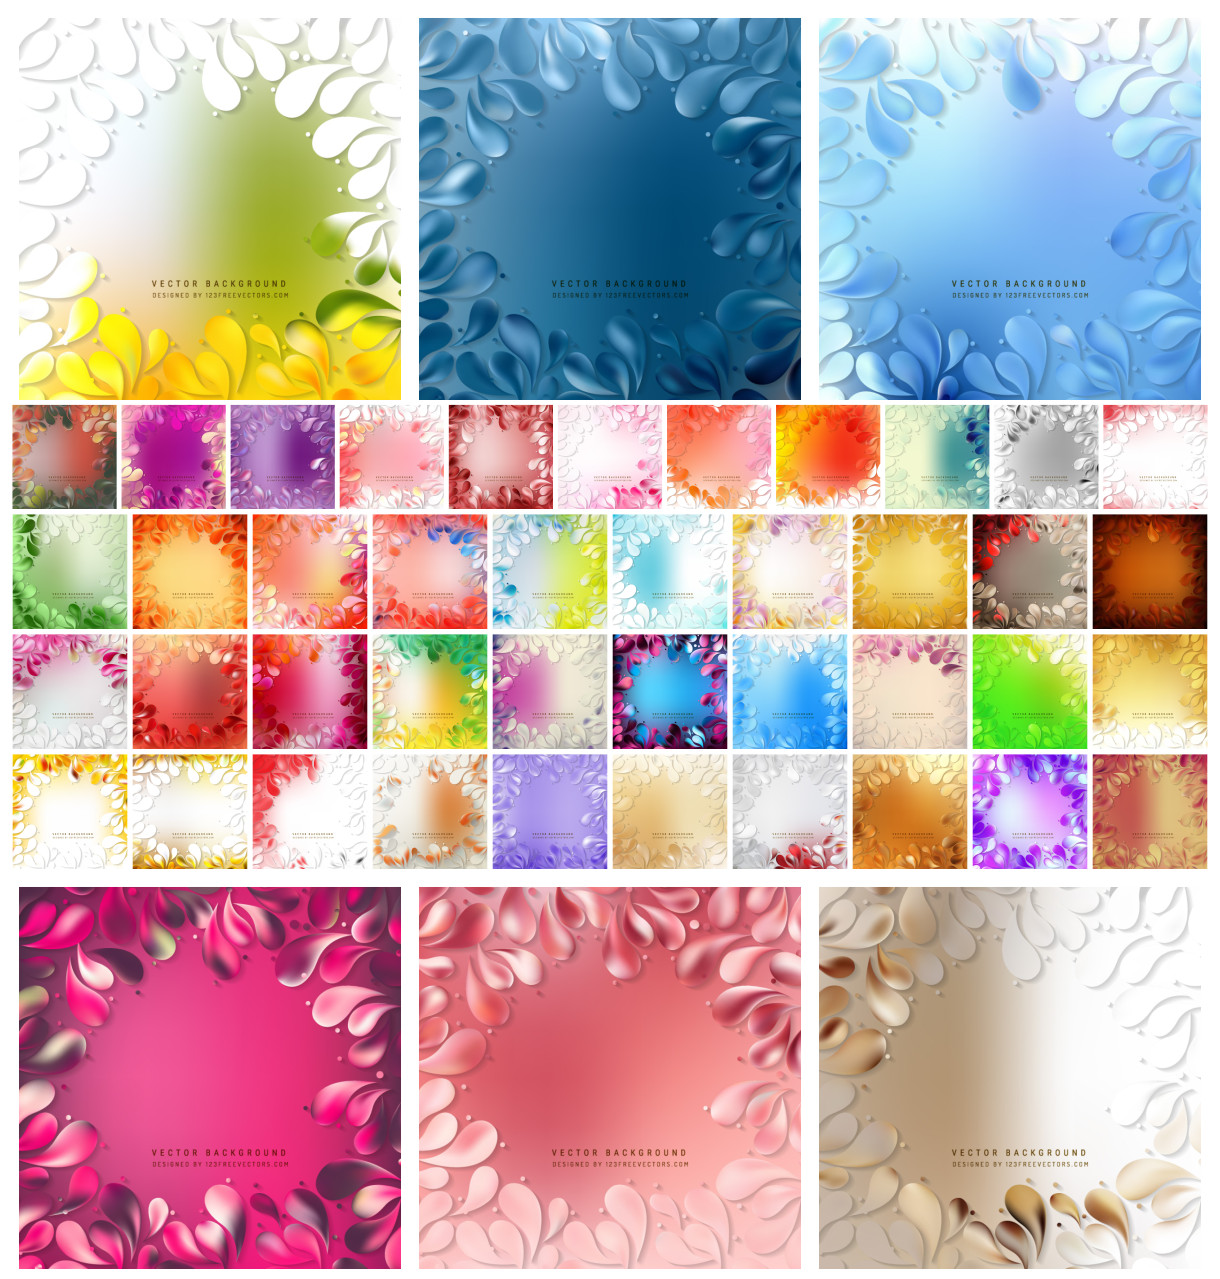 Unveiling the Arc Drops Background Vector: A Spectrum of Artistic Floral Backgrounds